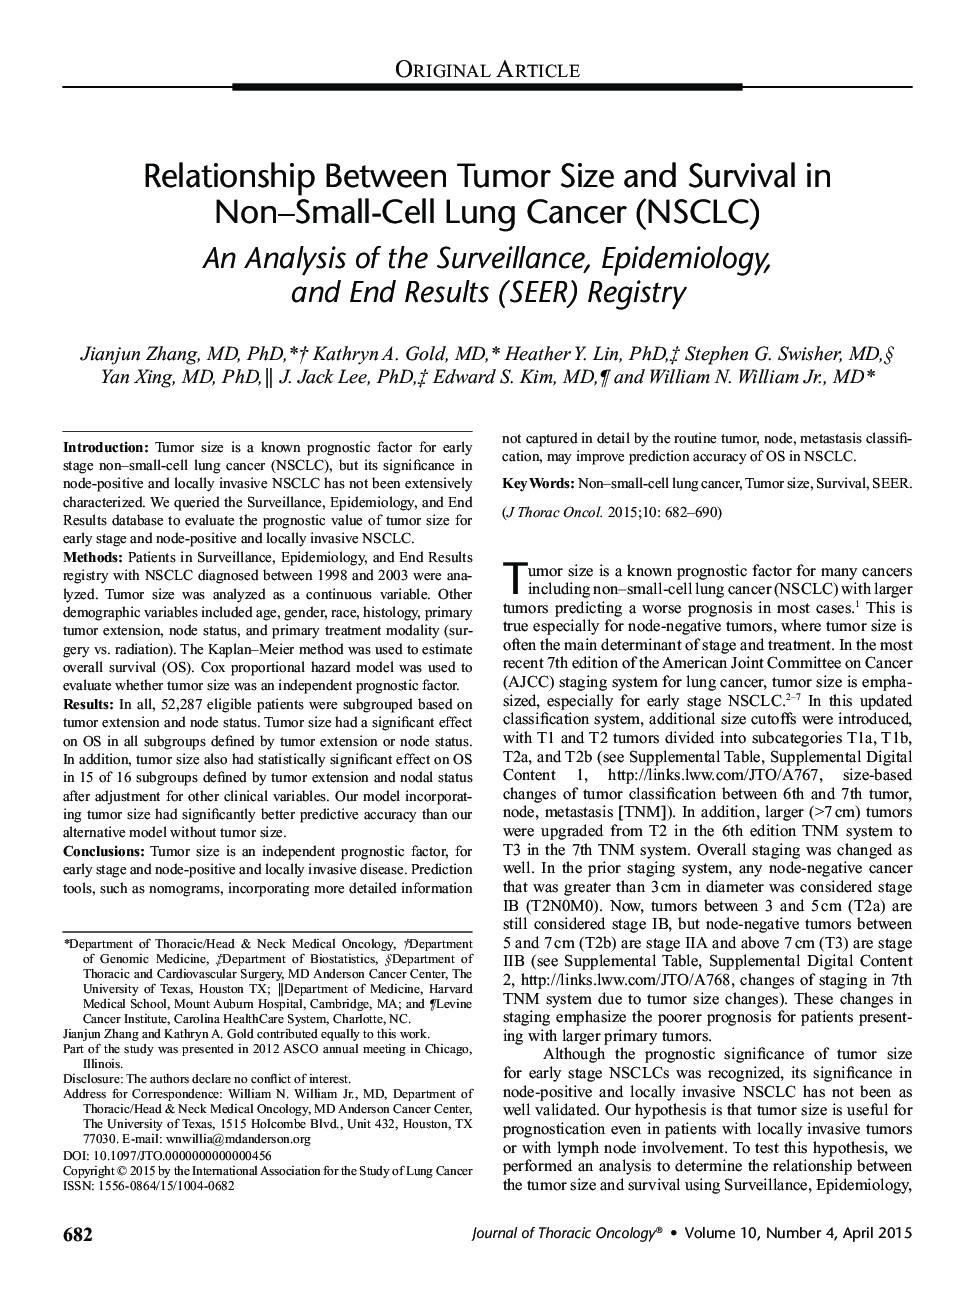 Relationship Between Tumor Size and Survival in Non-Small-Cell Lung Cancer (NSCLC): An Analysis of the Surveillance, Epidemiology, and End Results (SEER) Registry